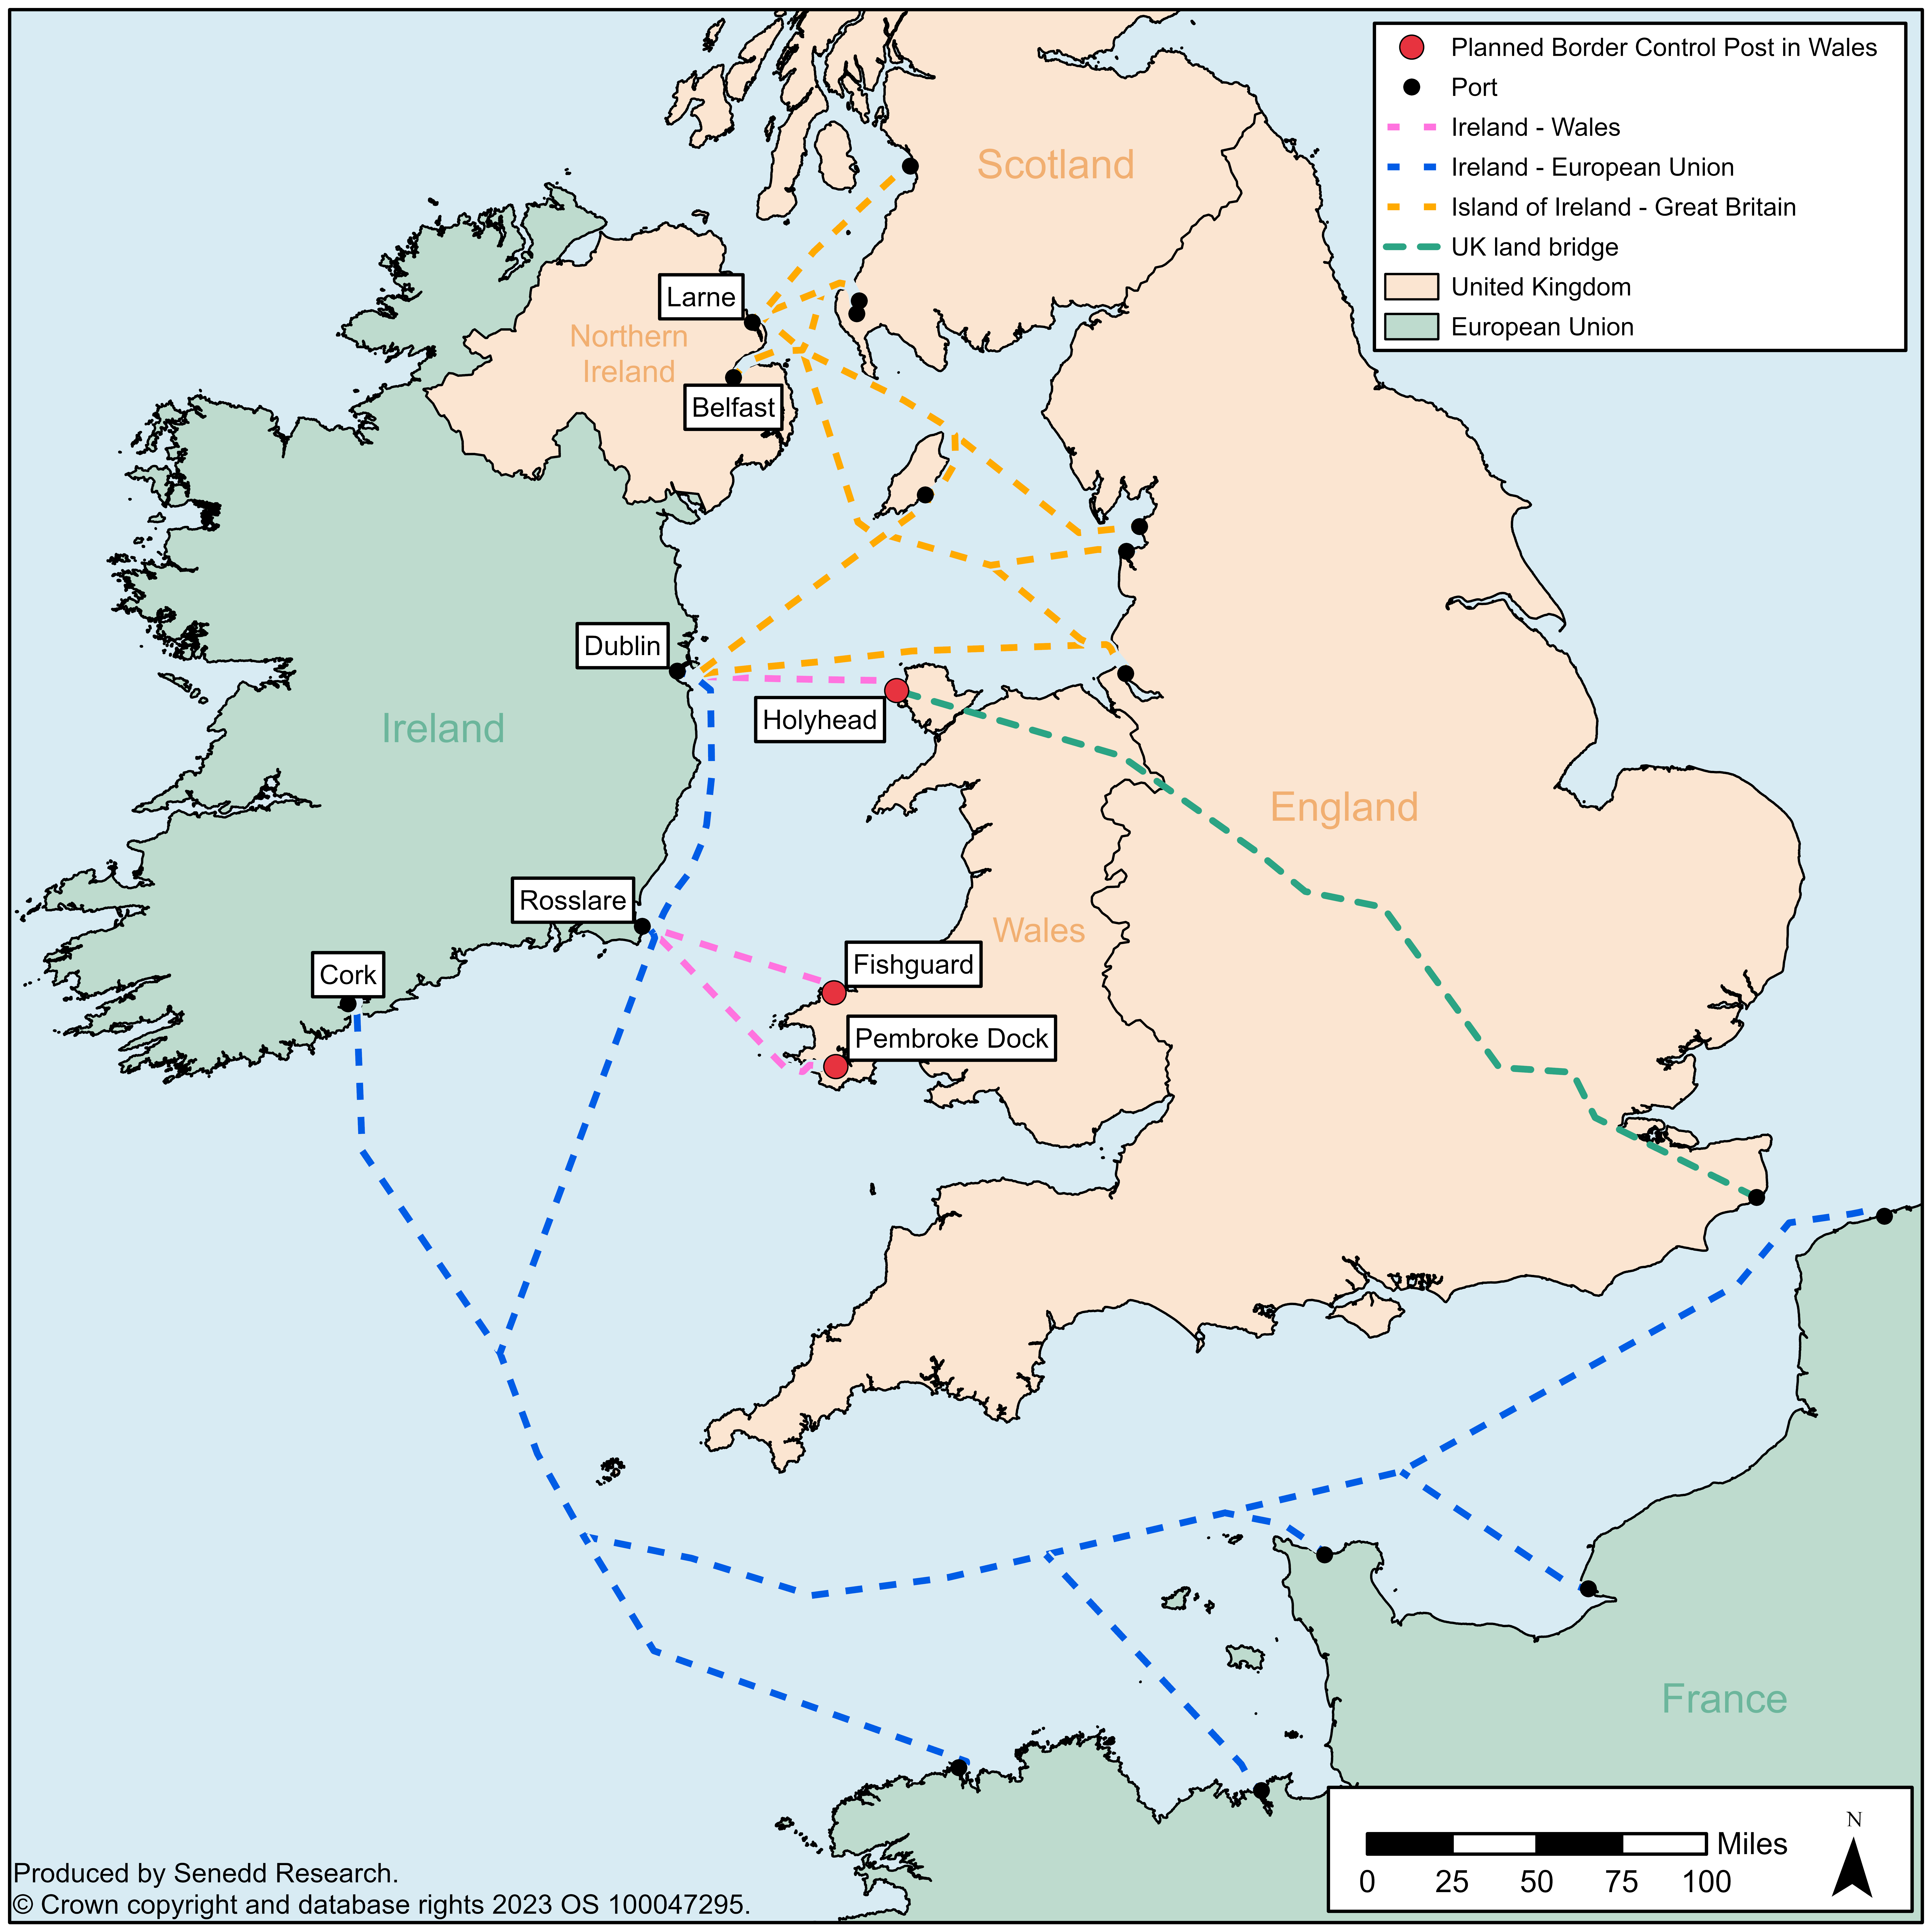 The map shows the island of Ireland, Great Britain and mainland Europe. Across the map are dotted lines showing trade routes between the three geographic areas, including Wales-Ireland shipping routes (between Dublin and Holyhead, Rosslare and Fishguard and Rosslare and Pembroke Dock).